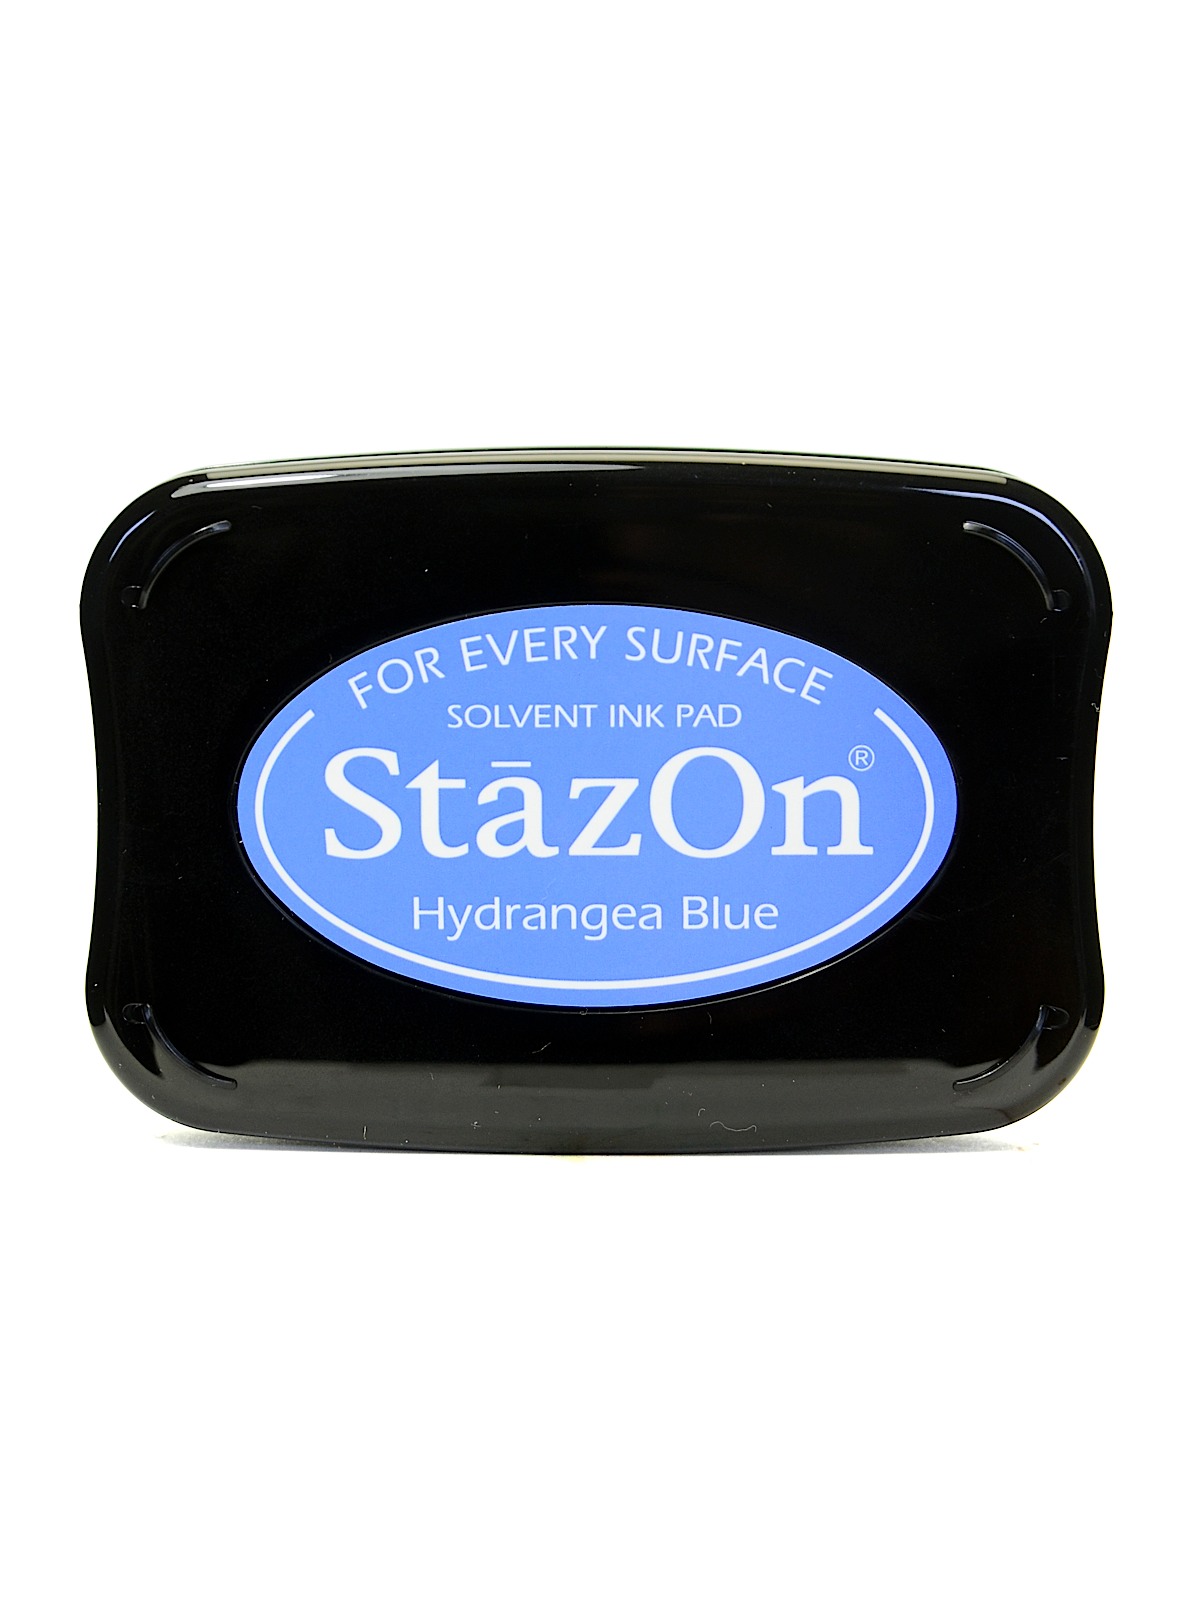 Stazon Solvent Ink Hydrangea Blue 3.75 In. X 2.625 In. Full-size Pad